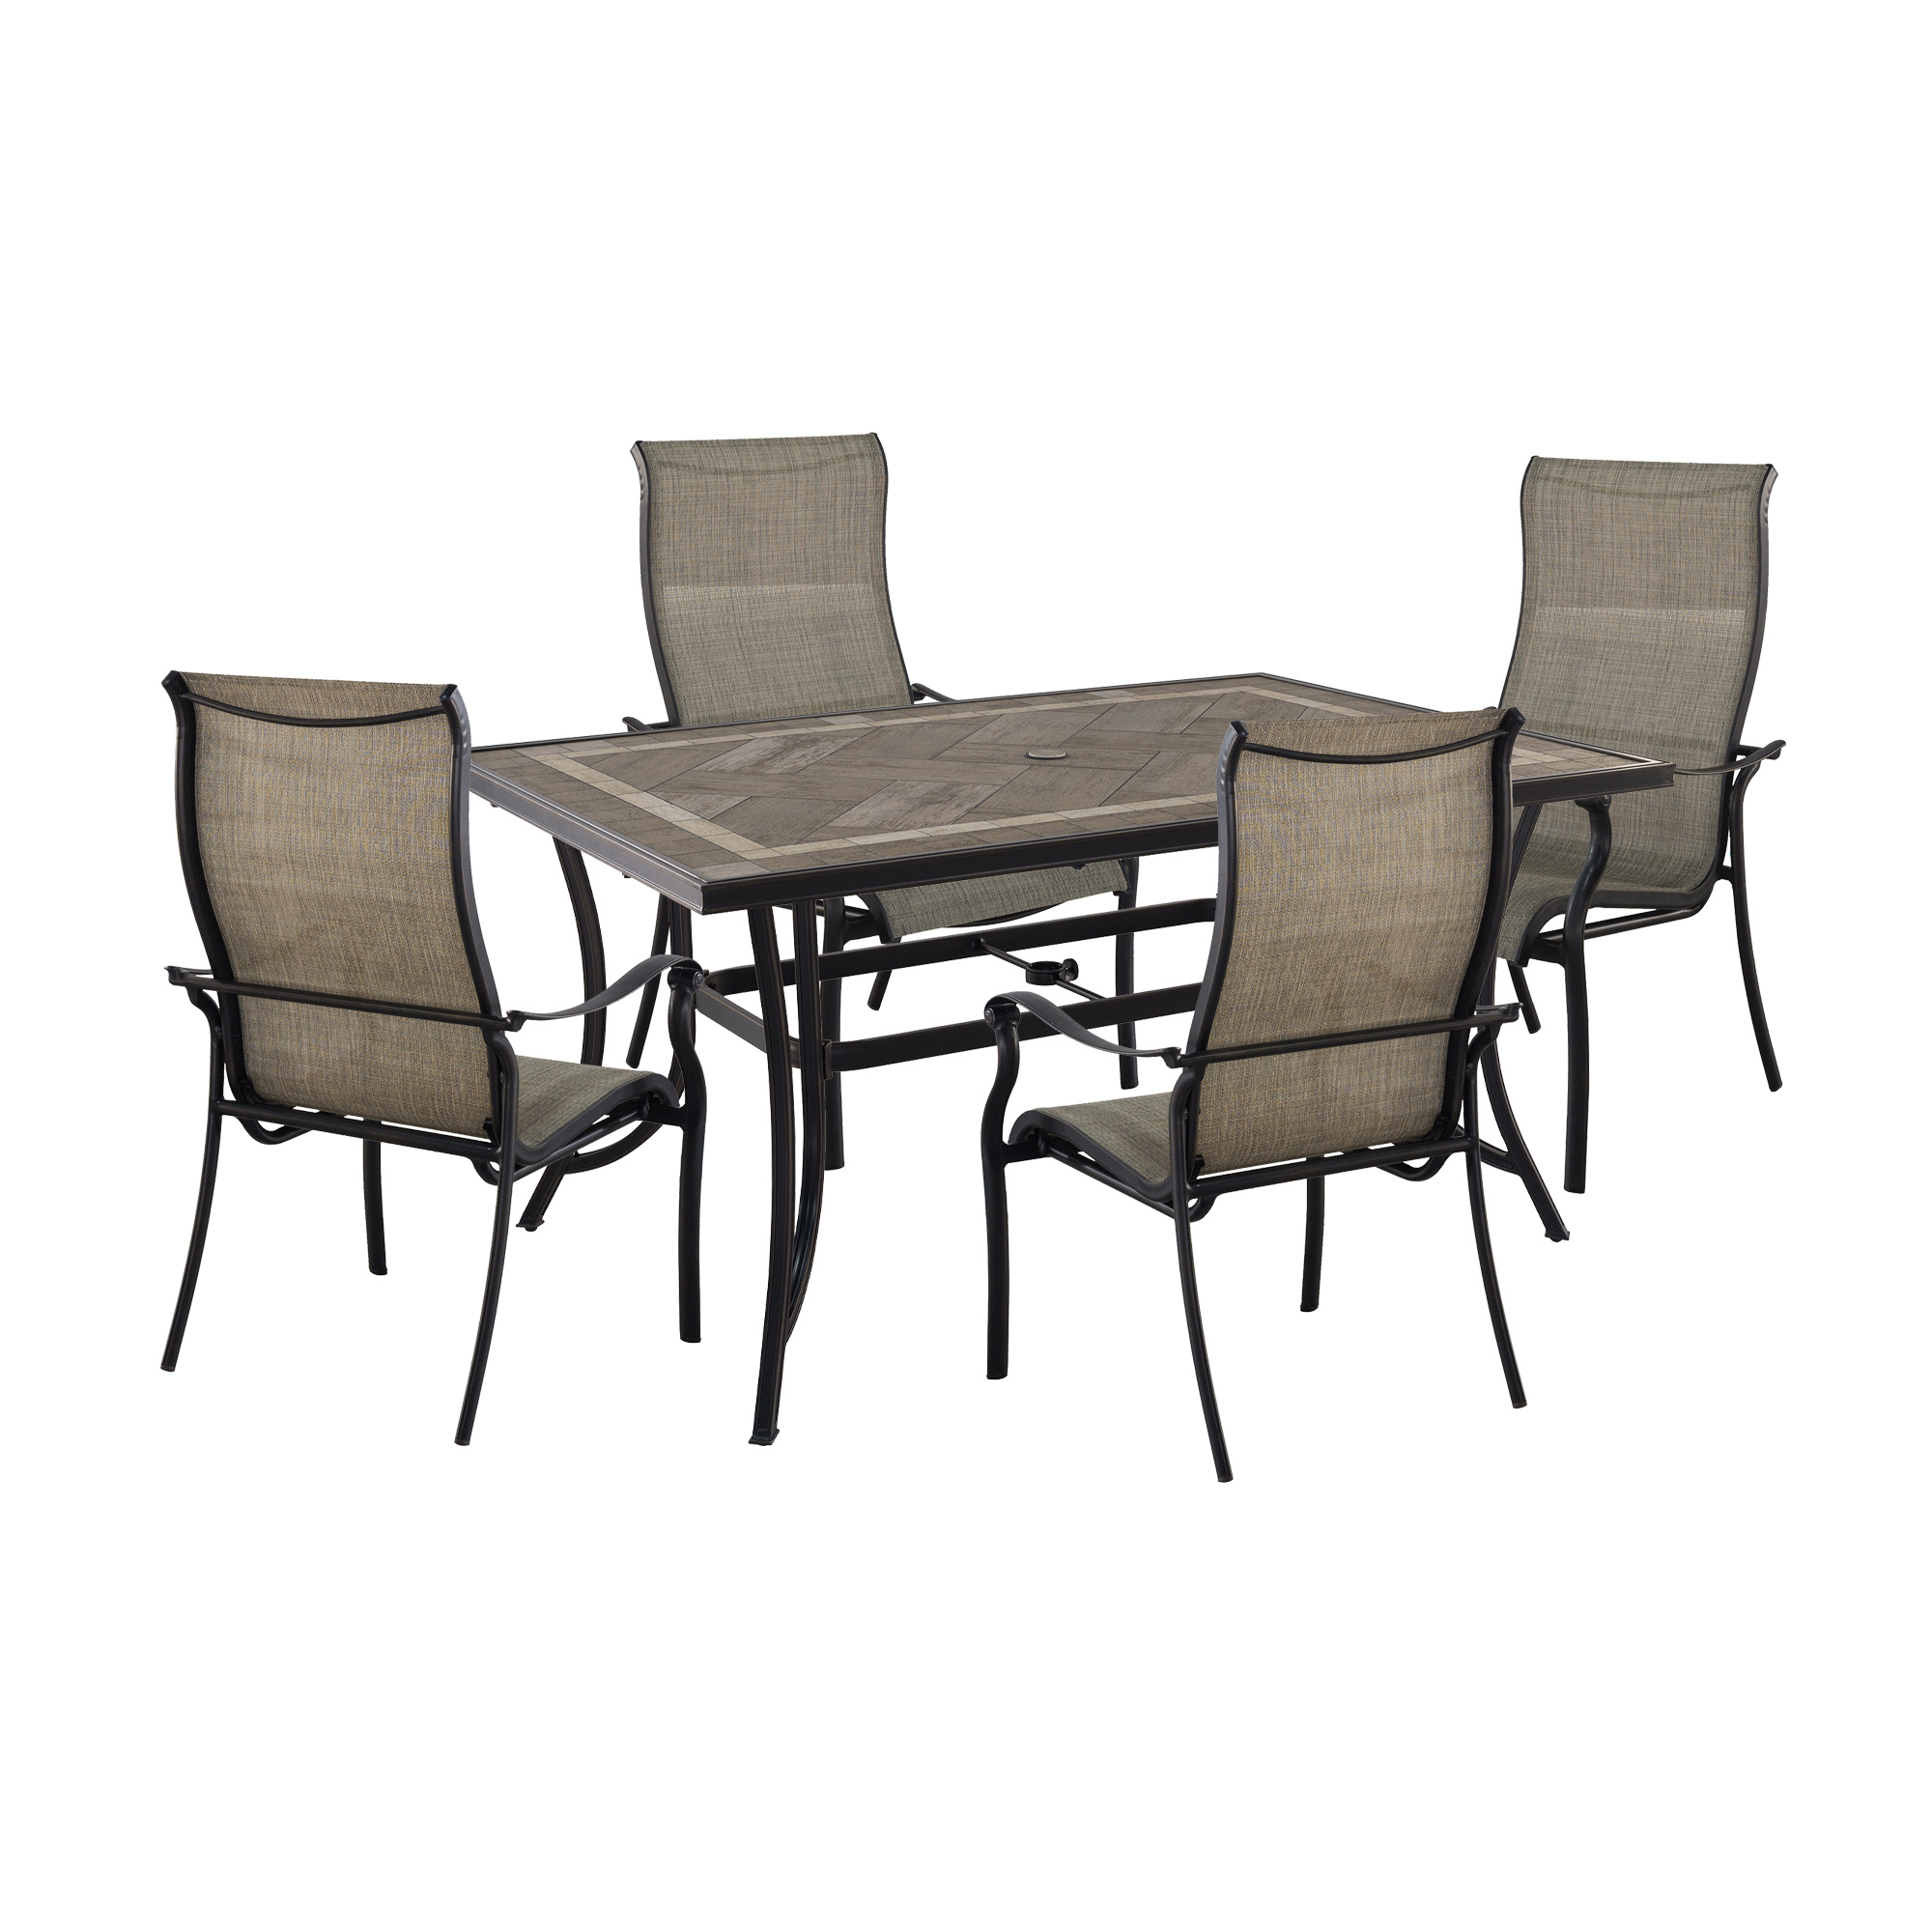 Cast Aluminum 5-Piece Outdoor Patio Dining Set with Ceramic Tile Top Round Table and Chairs